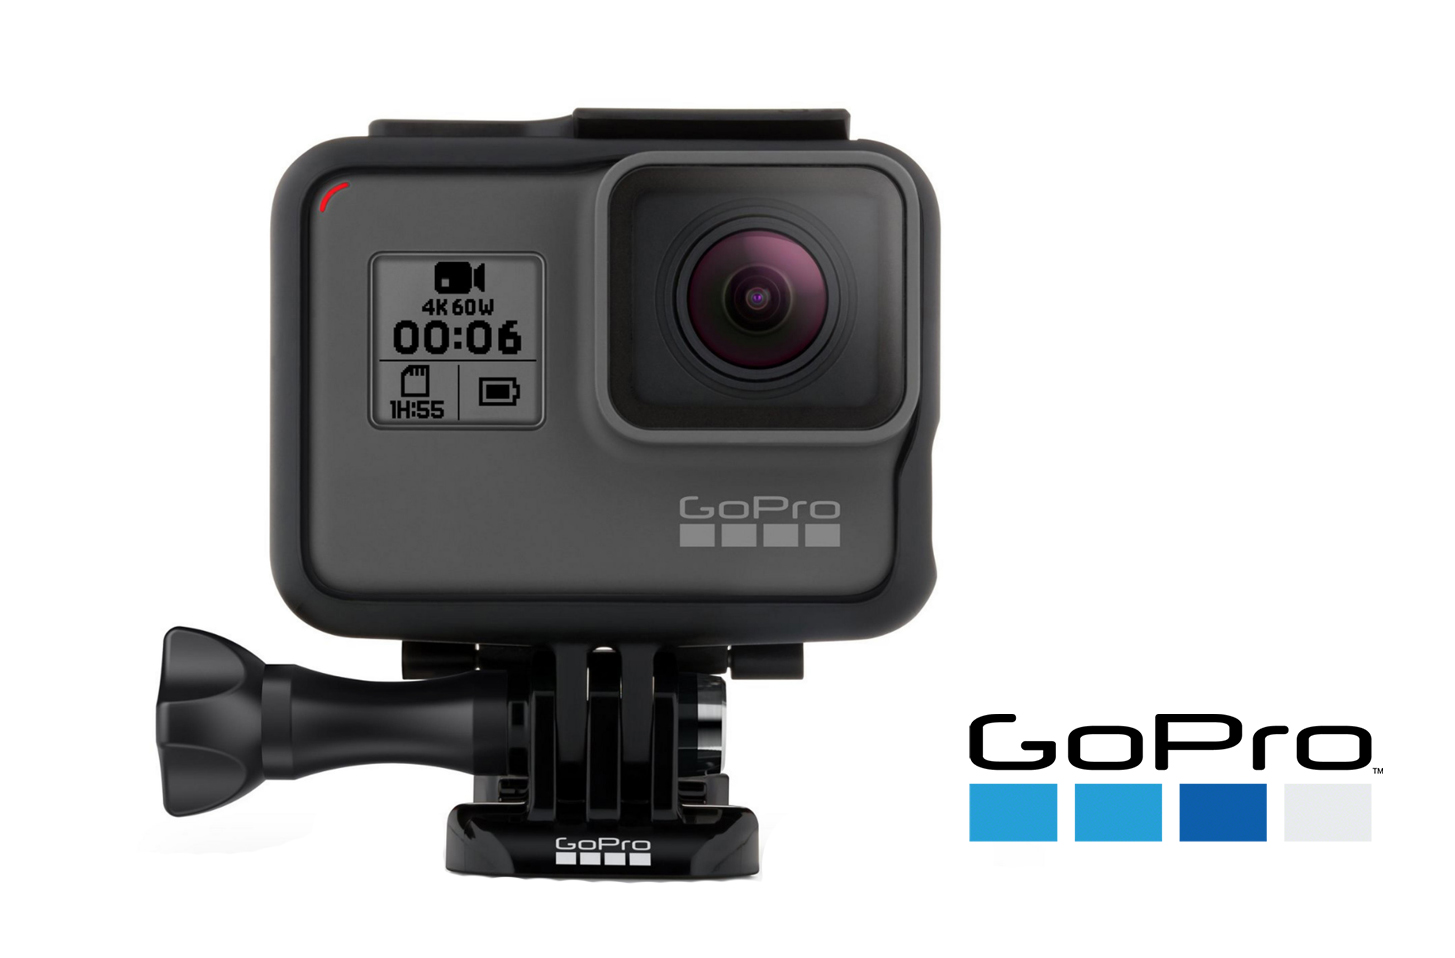 Here's where things went wrong for GoPro in 2017